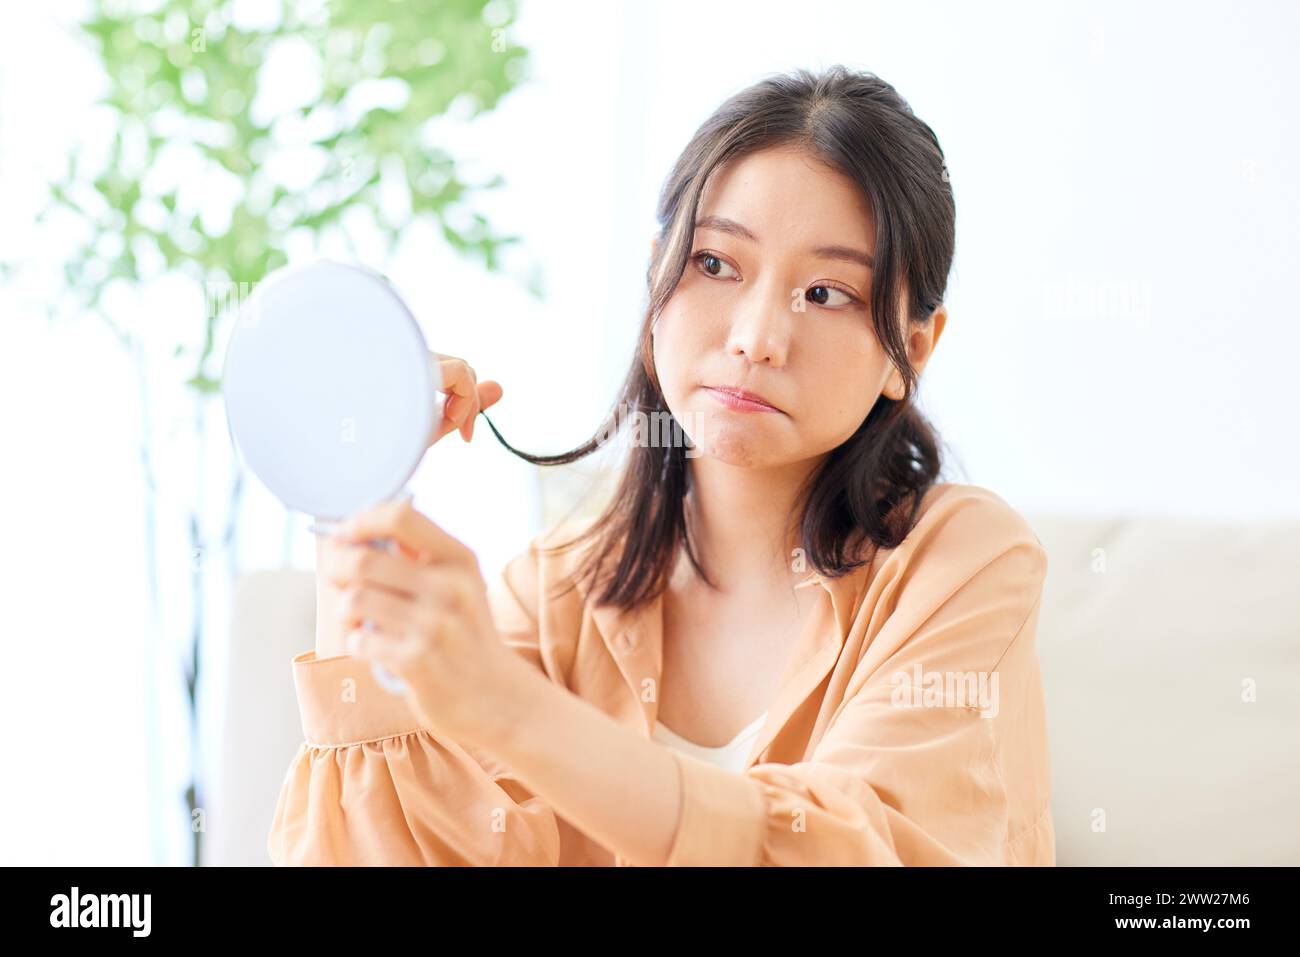 A woman looking at her reflection in a mirror Stock Photo